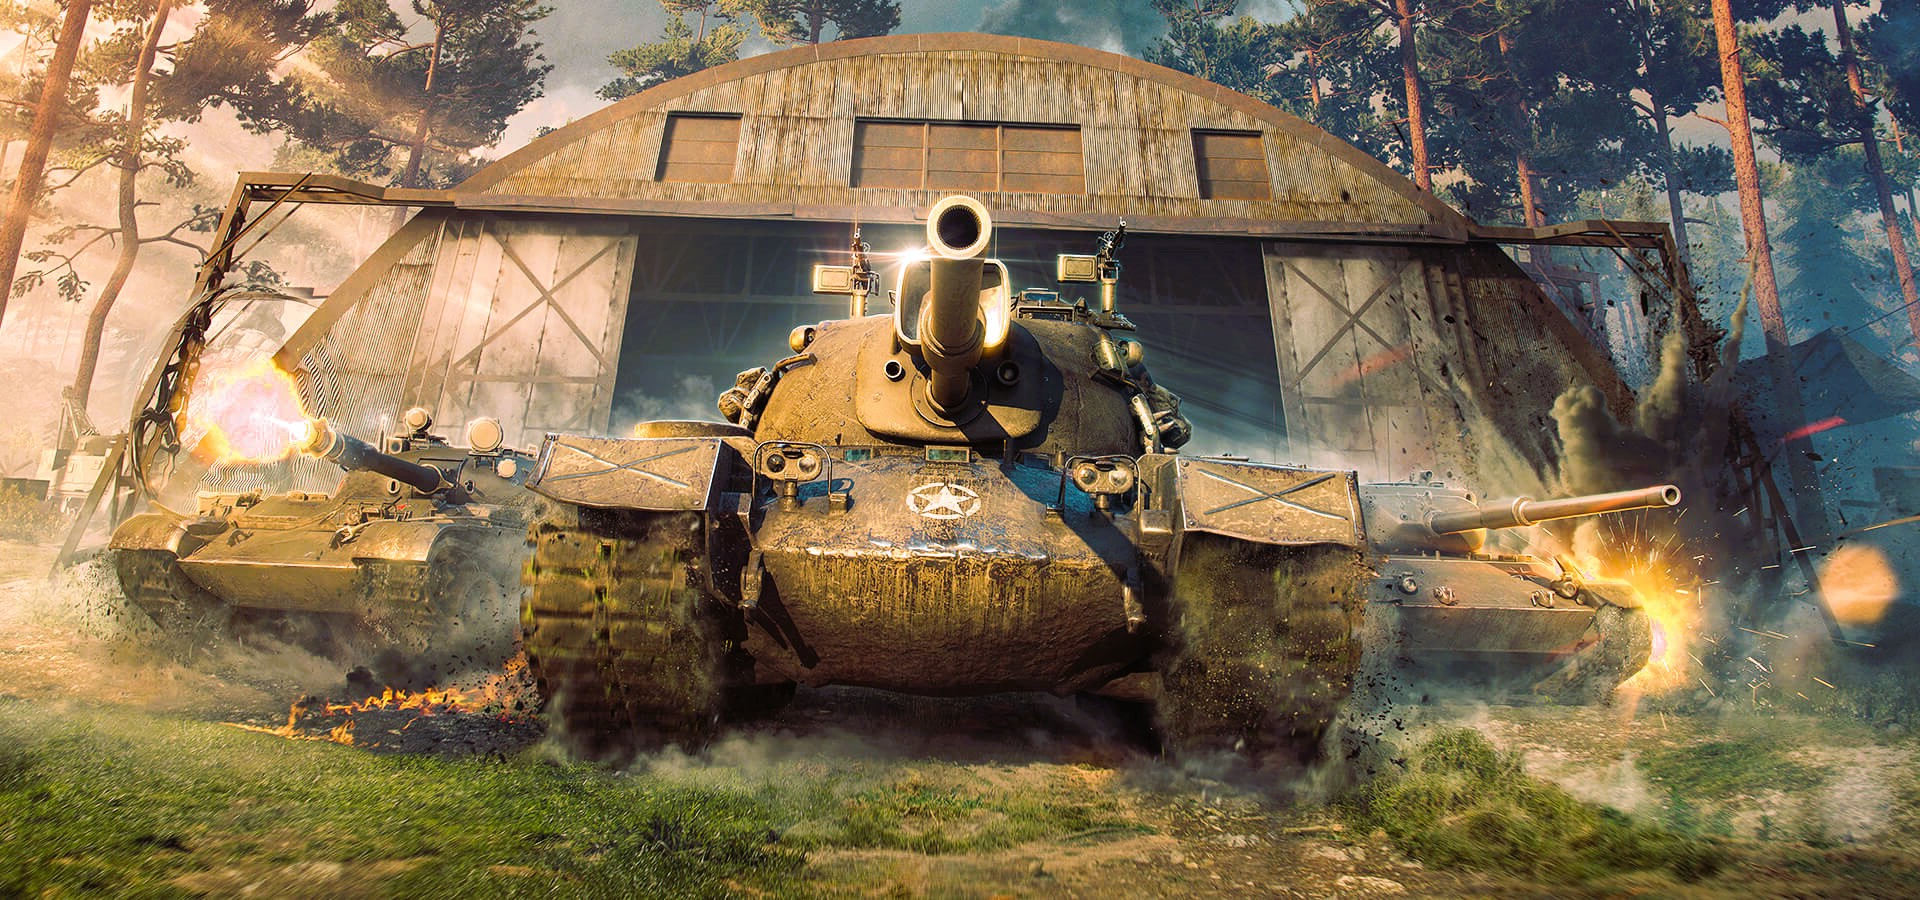 A Review of World of Tanks